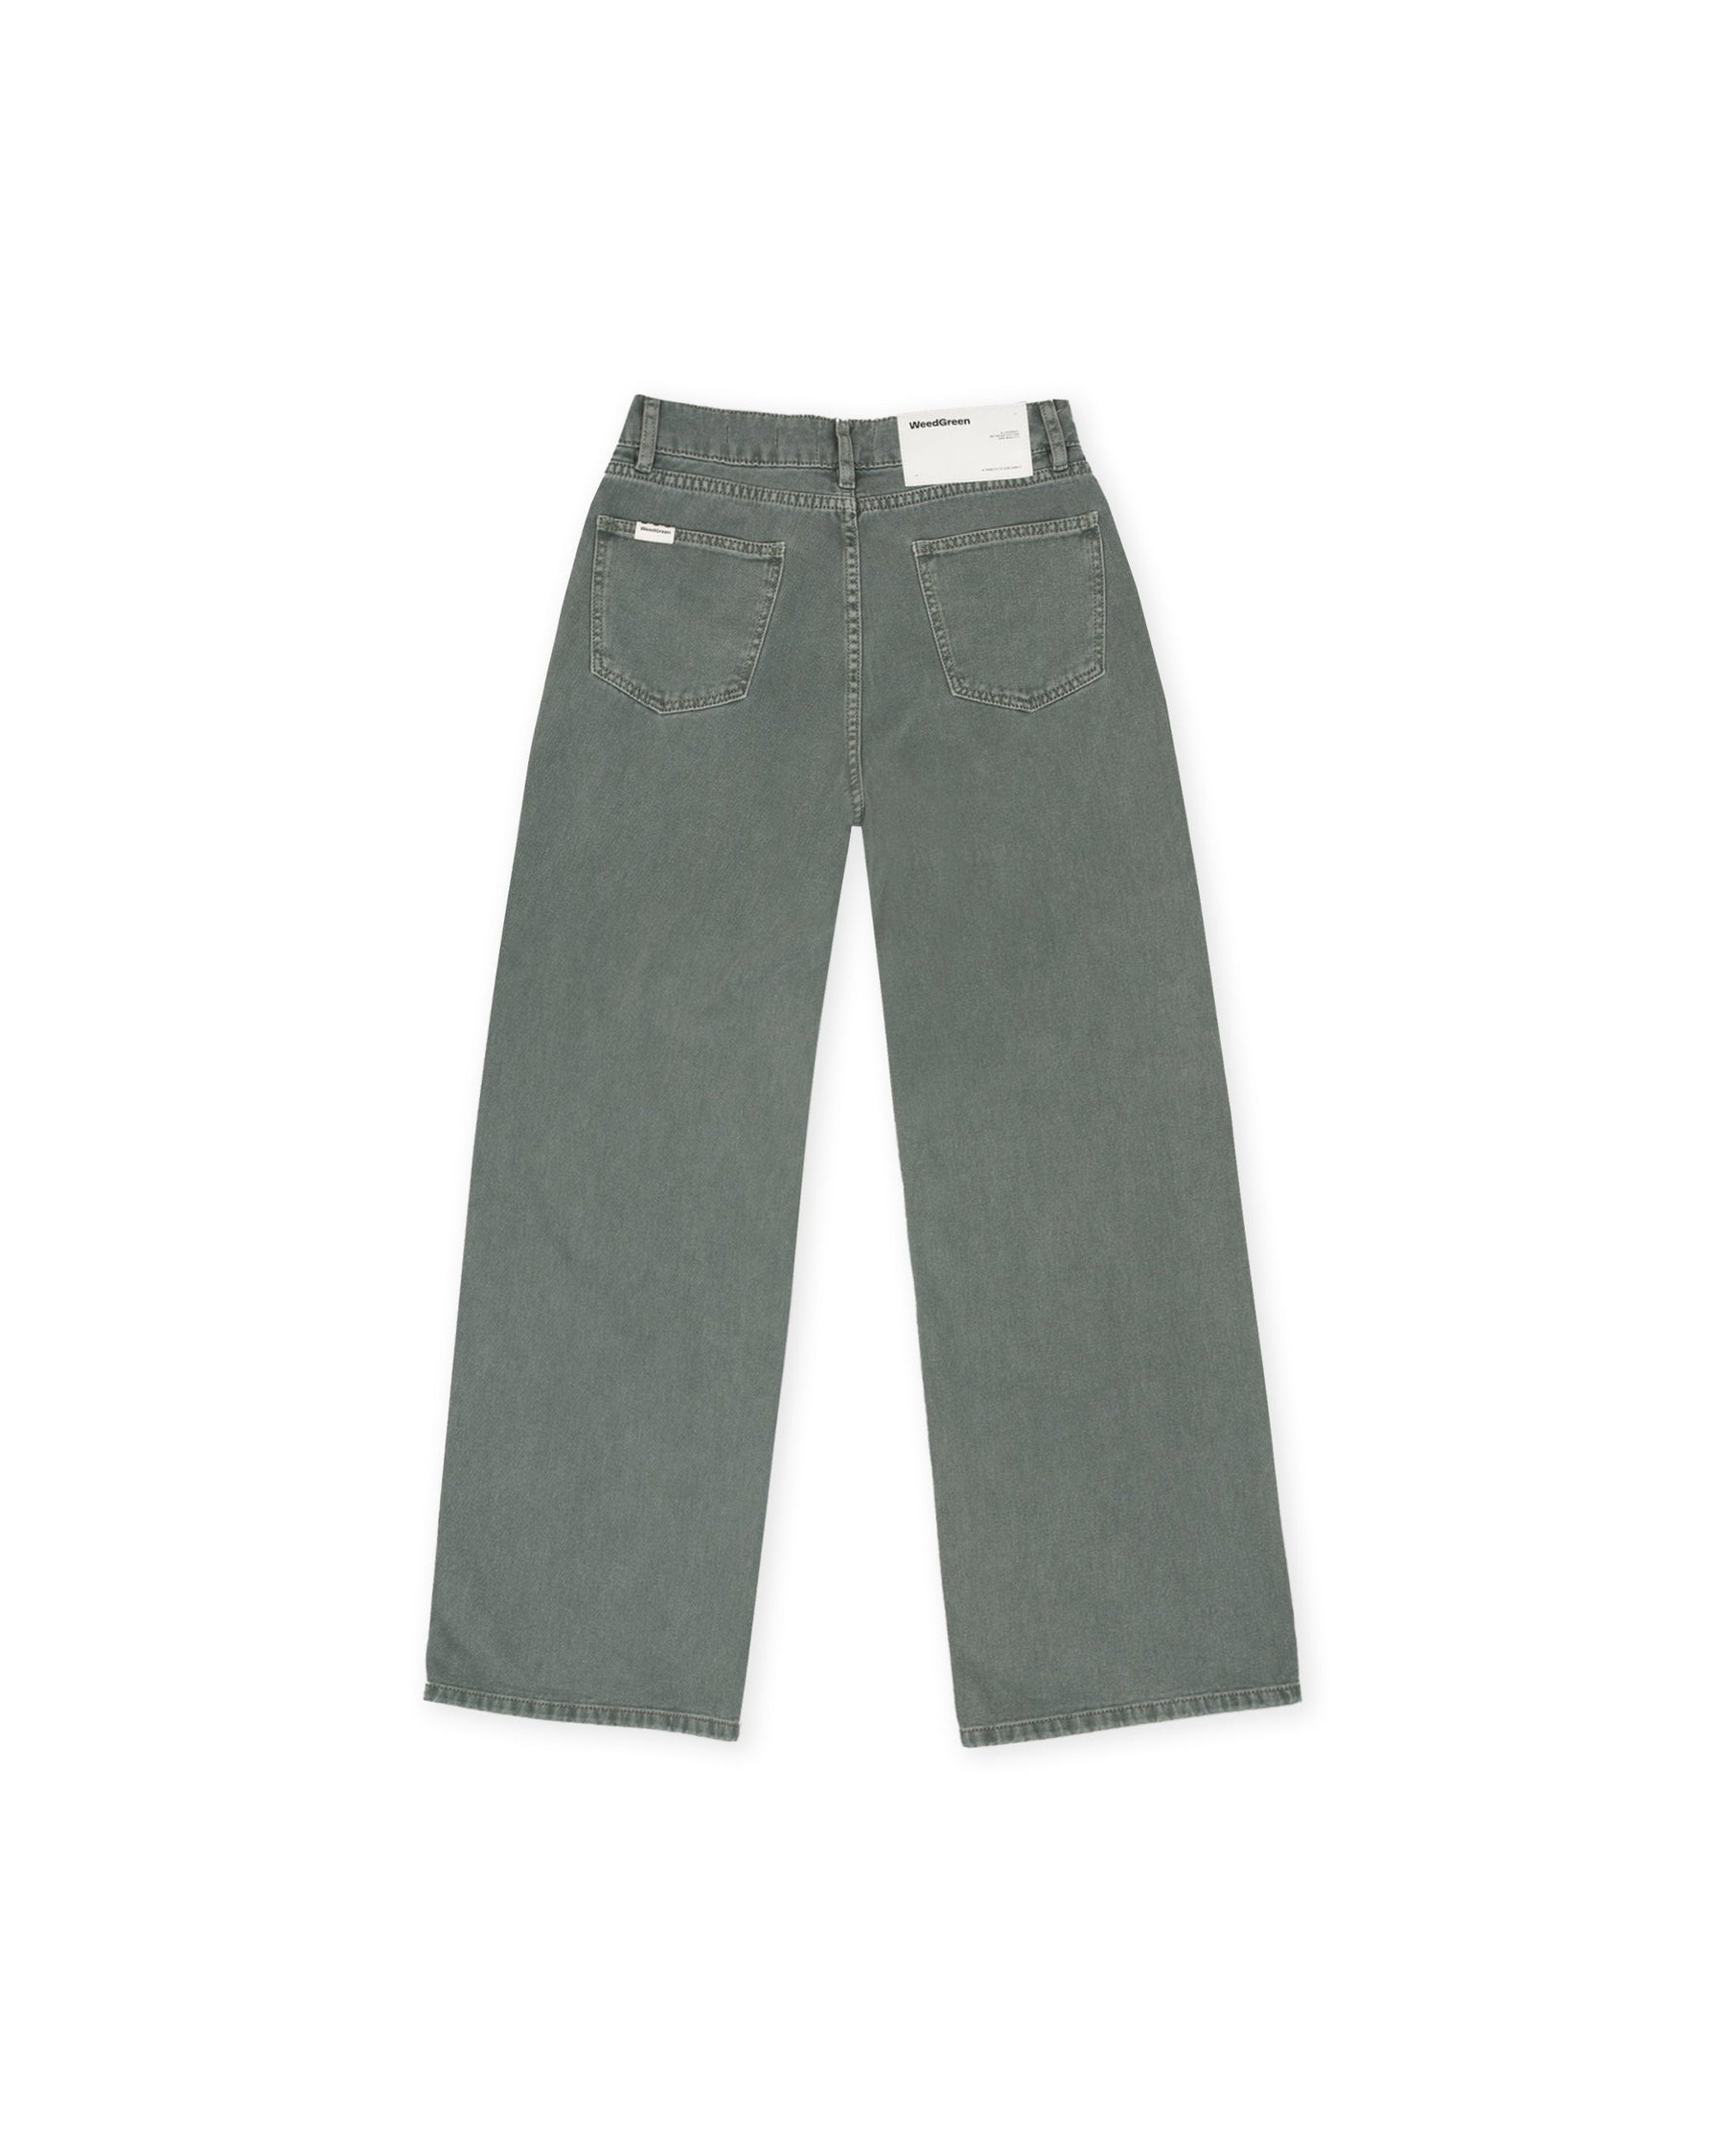 Jean recto mujer  777 gris